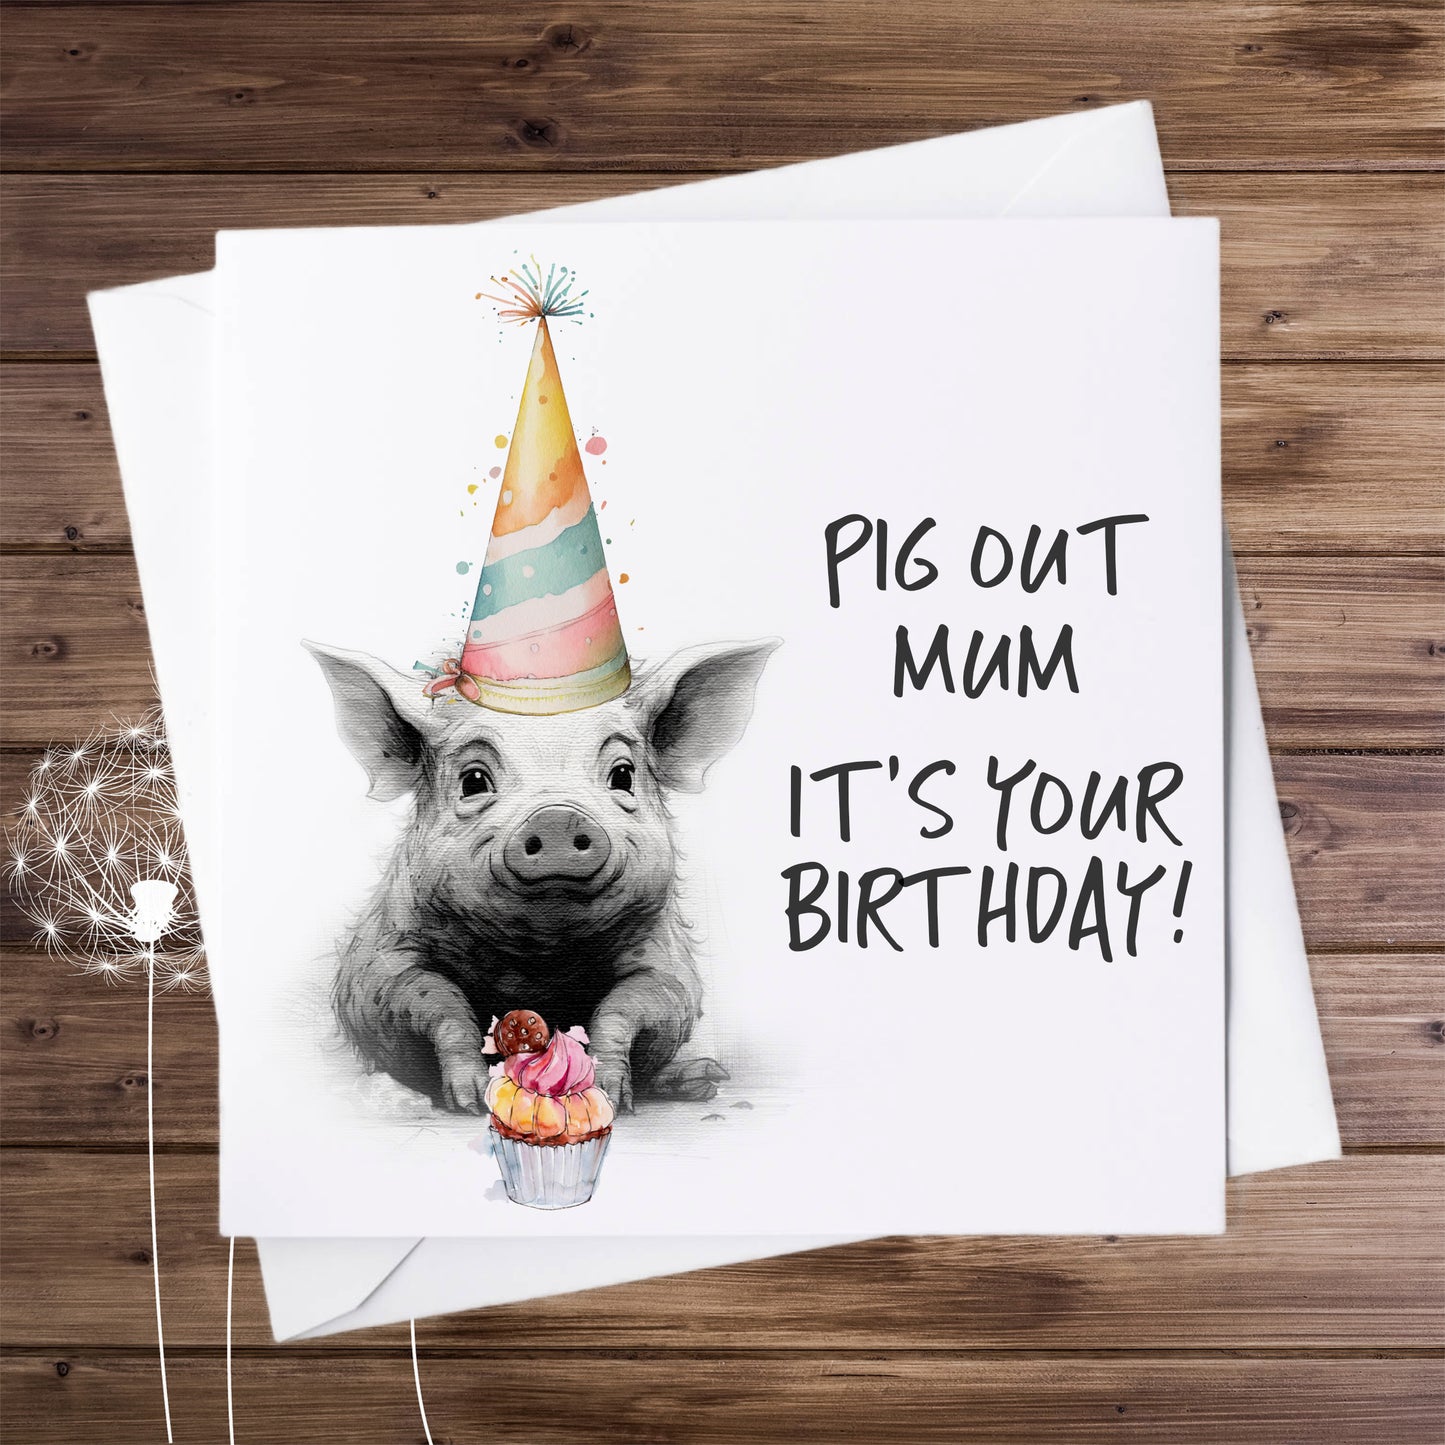 Birthday card, piglet in birthday hat. Pig out it's your birthday